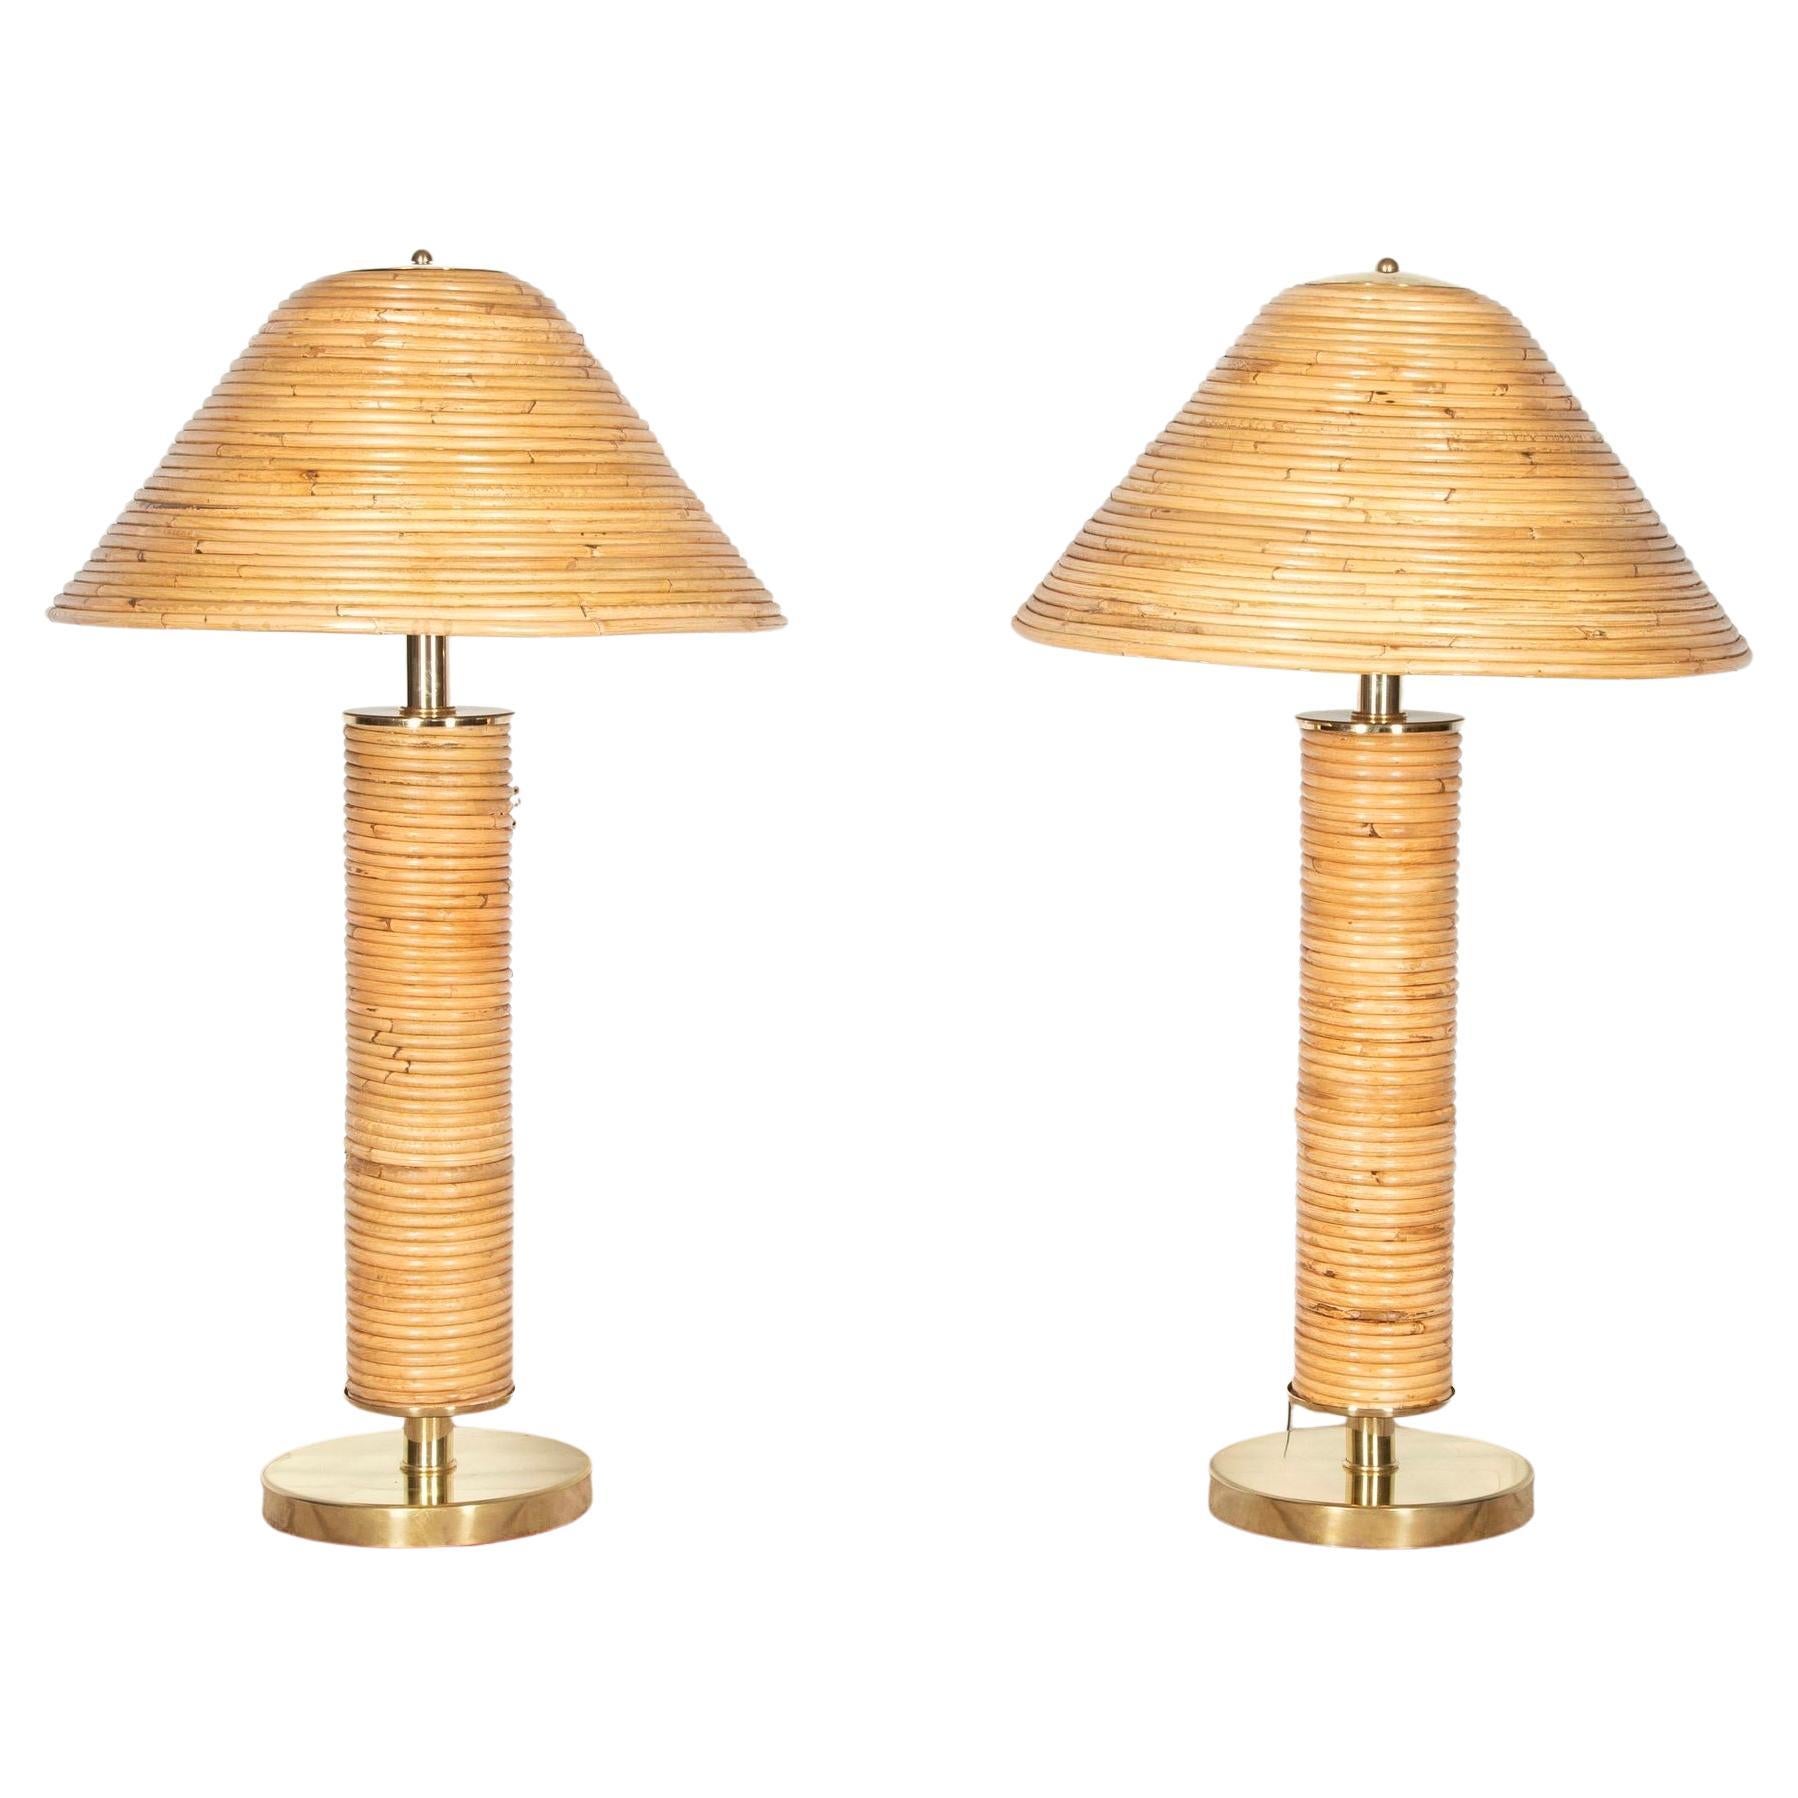 Pair of Contemporary Bamboo Table Lamps